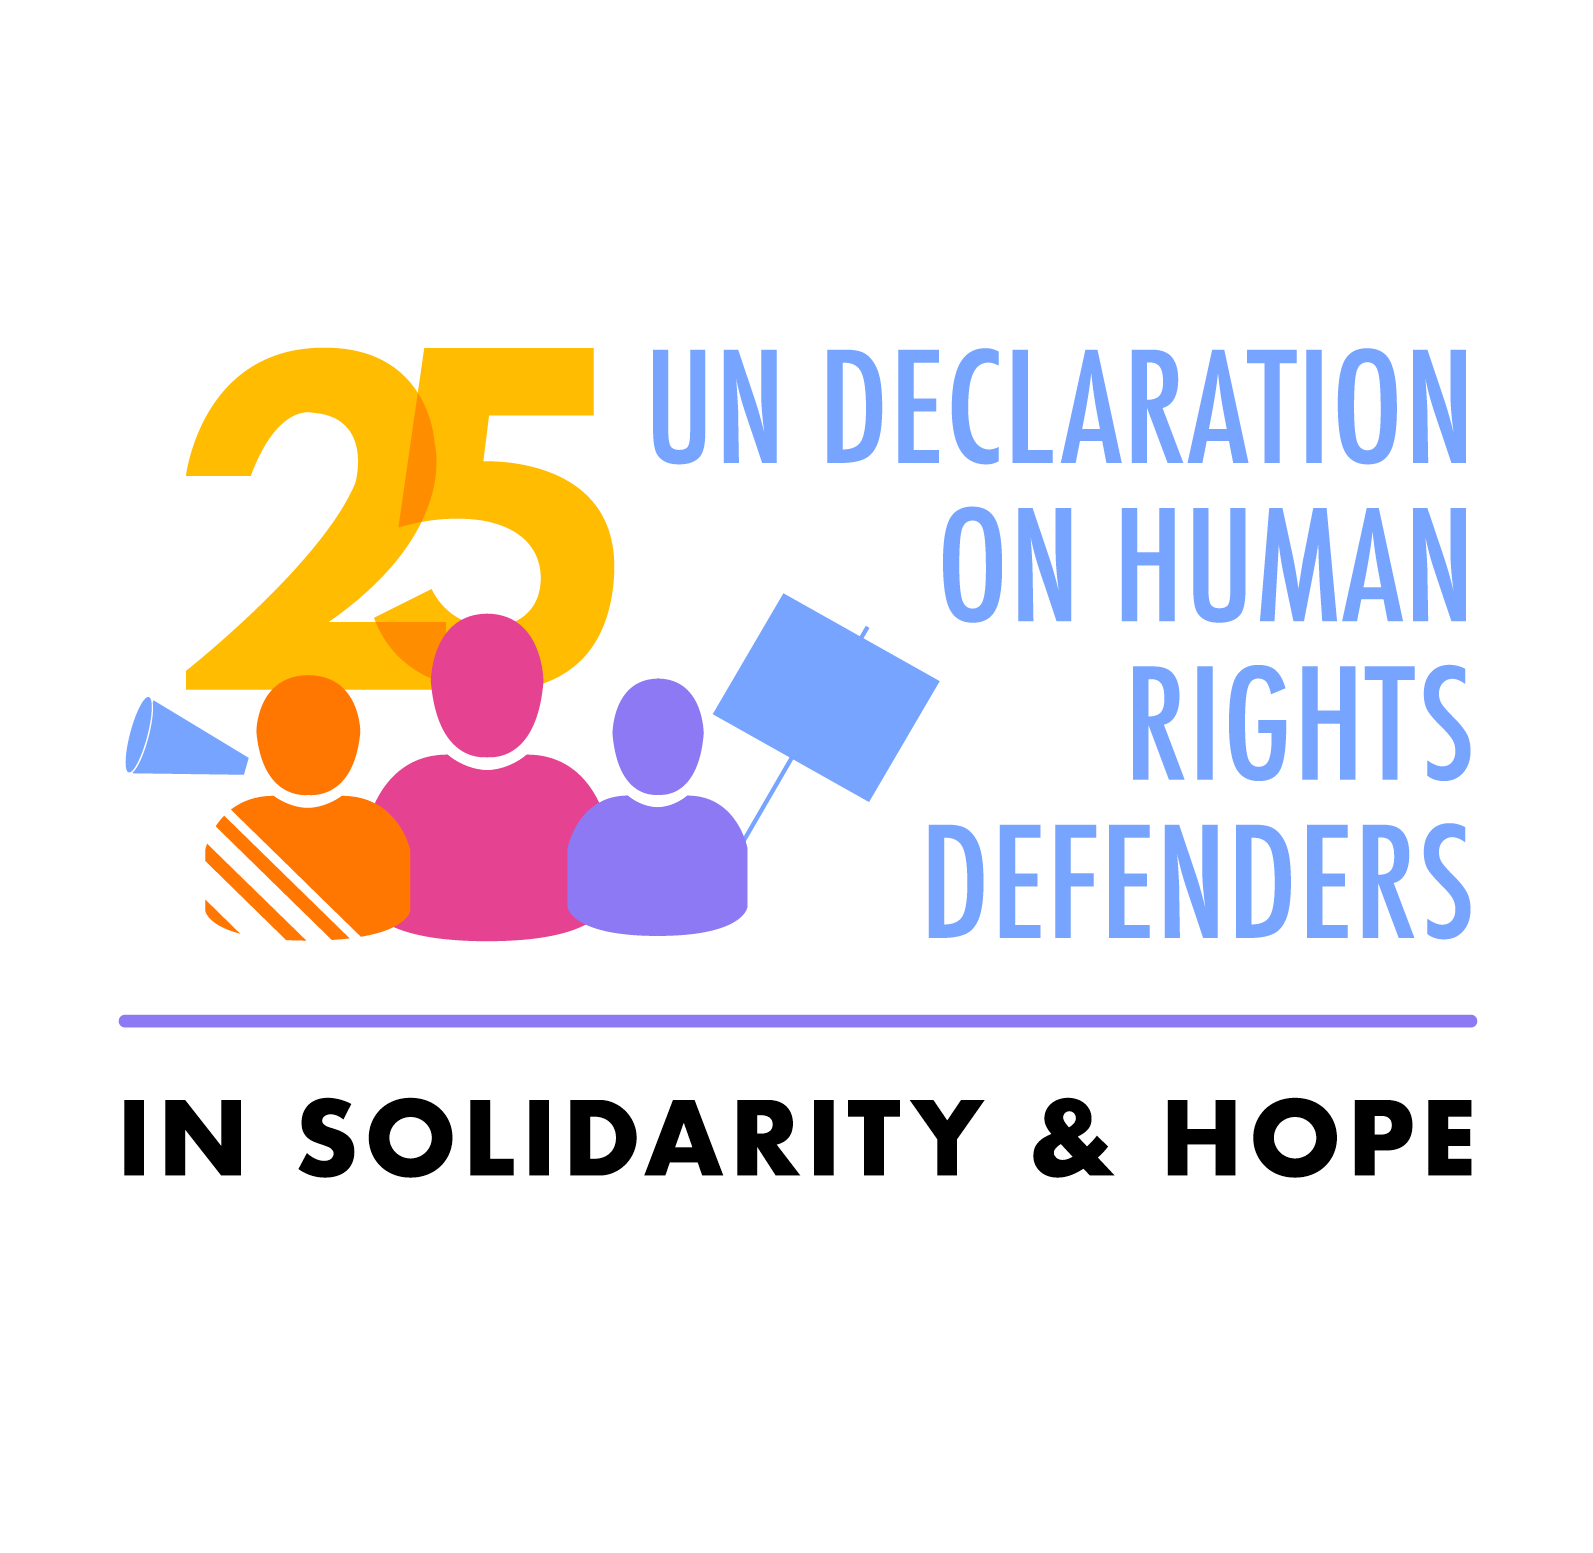 Logo for the 25th anniversary of the UN declaration on human rights defenders: in solidarity and hope.